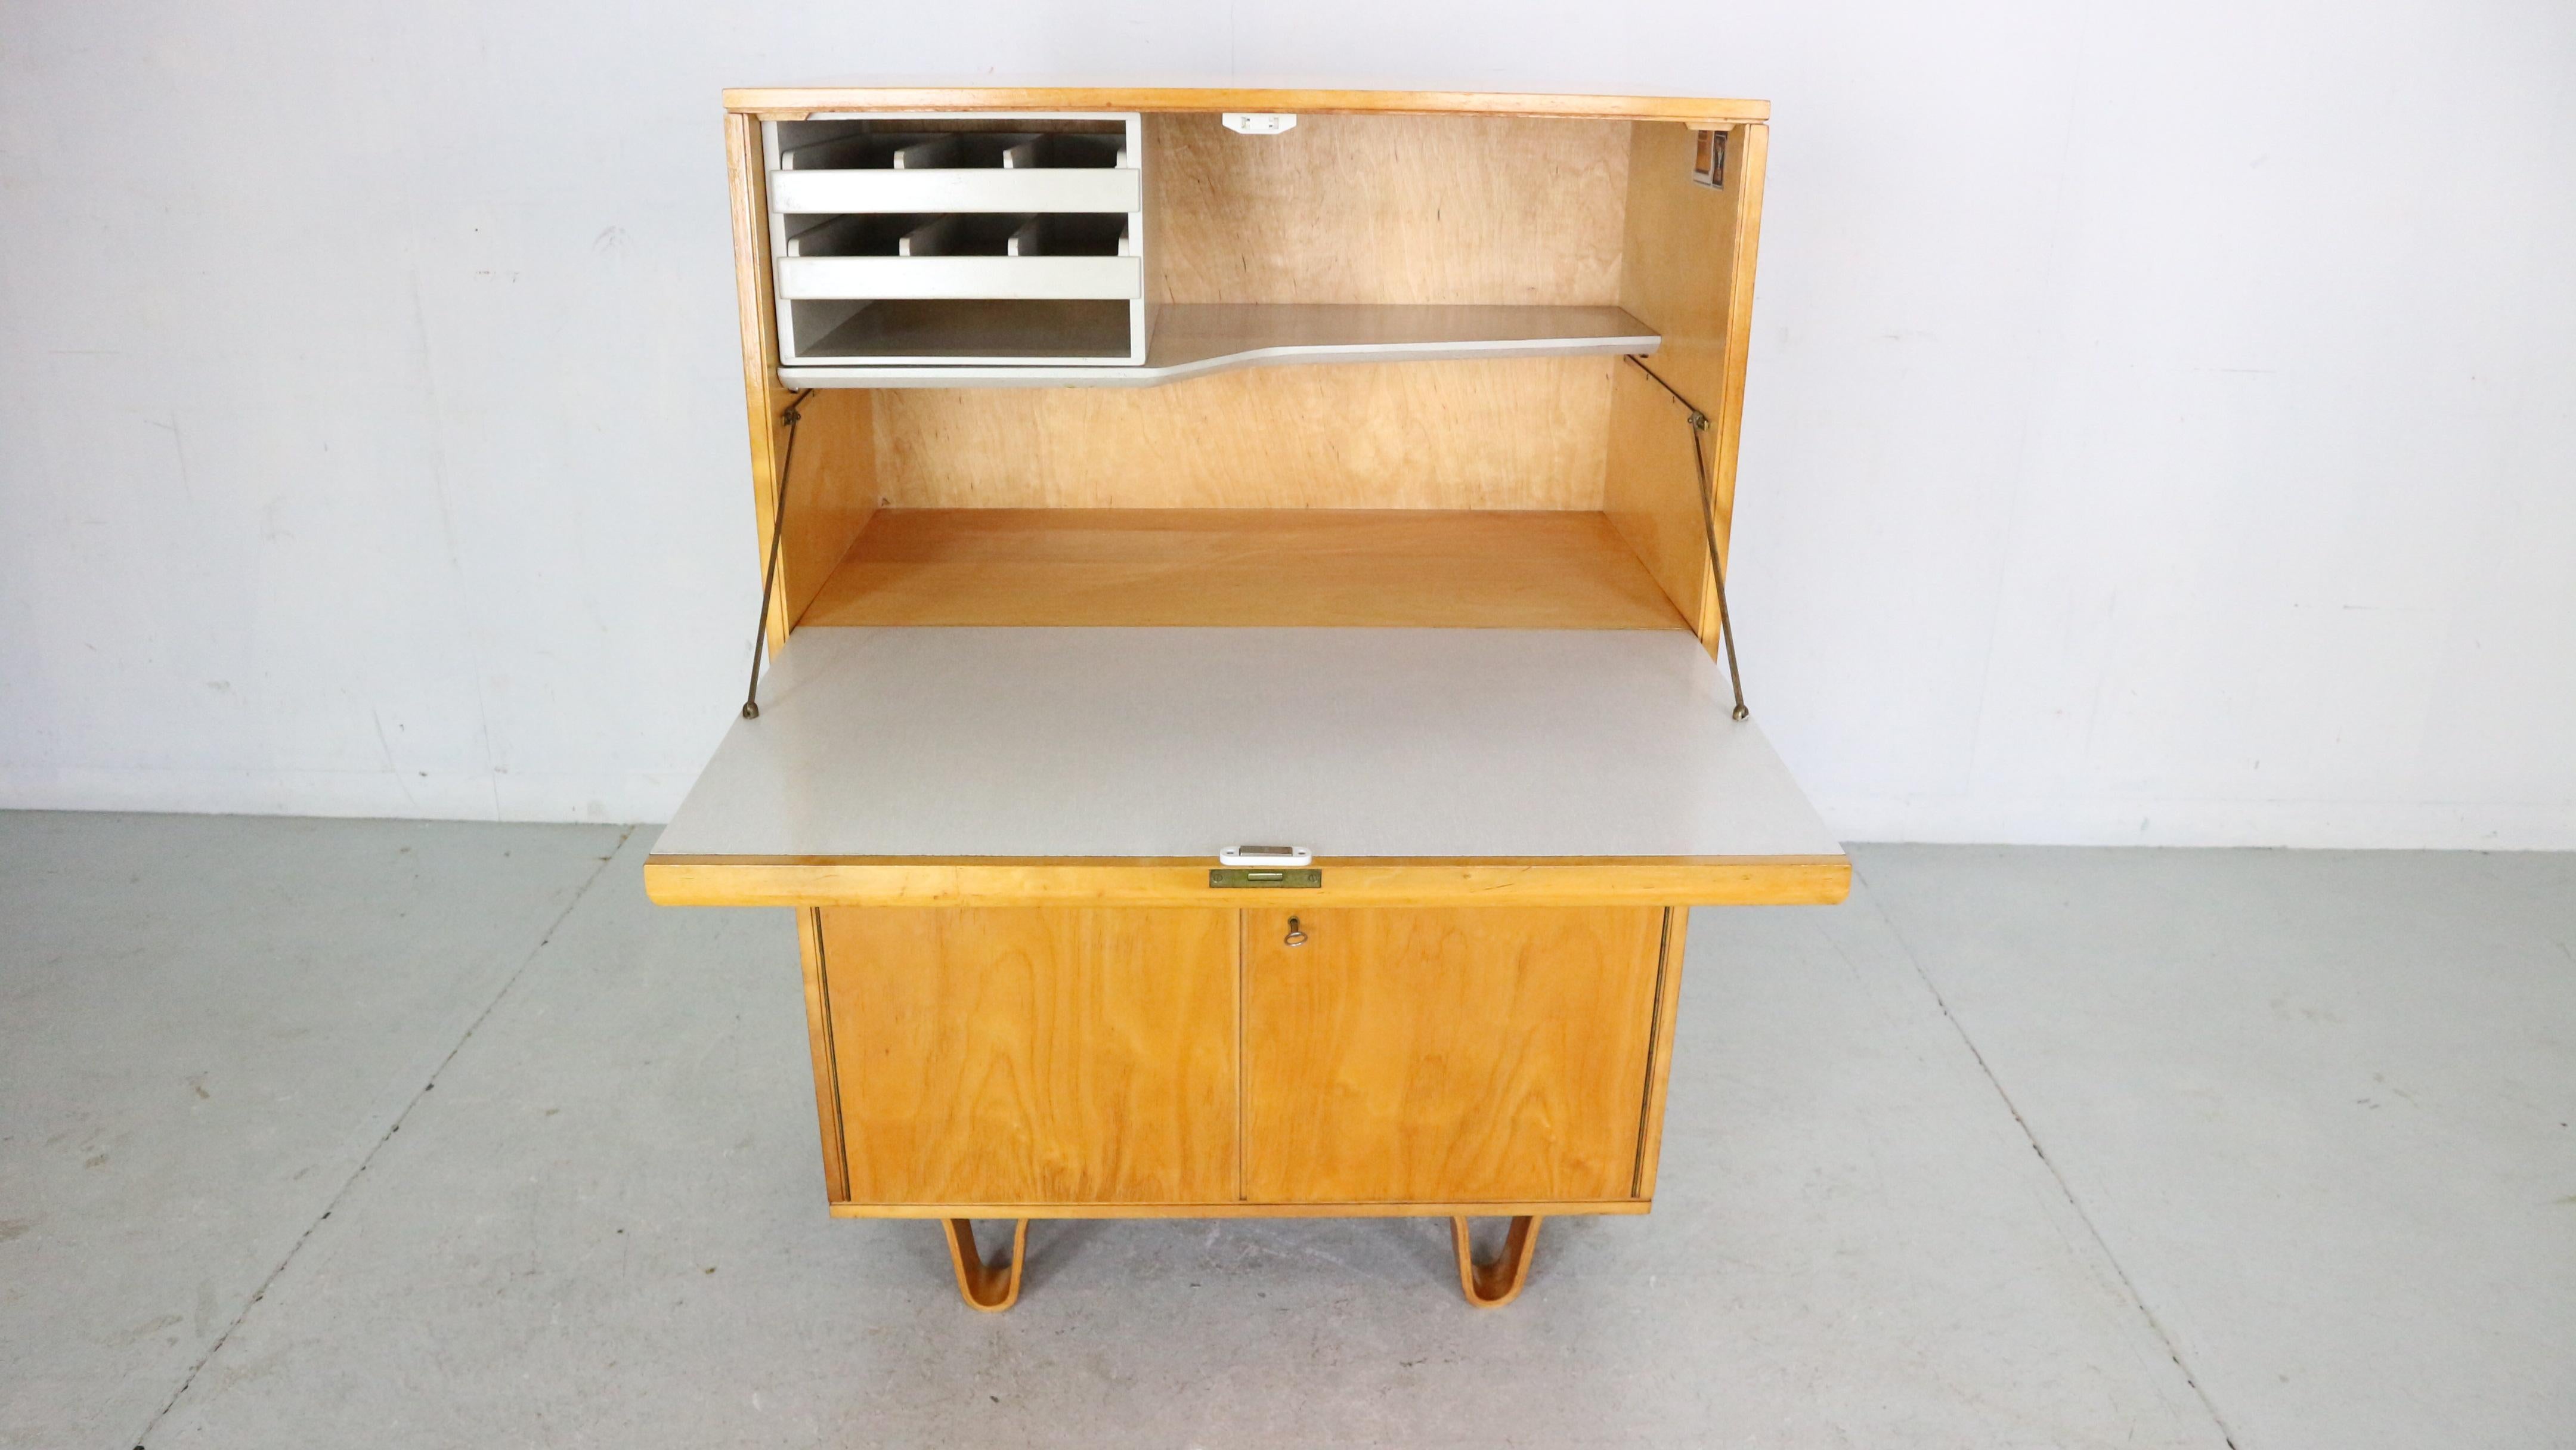 Mid- Century modern period secretary/ cabinet designed by famous Dutch furniture designer Cees Braakman and manufactured by Pastoe in early 1950's period.

Model- CB07
Cabinet has many shelves and drawers for storage. The drop down leave becomes a